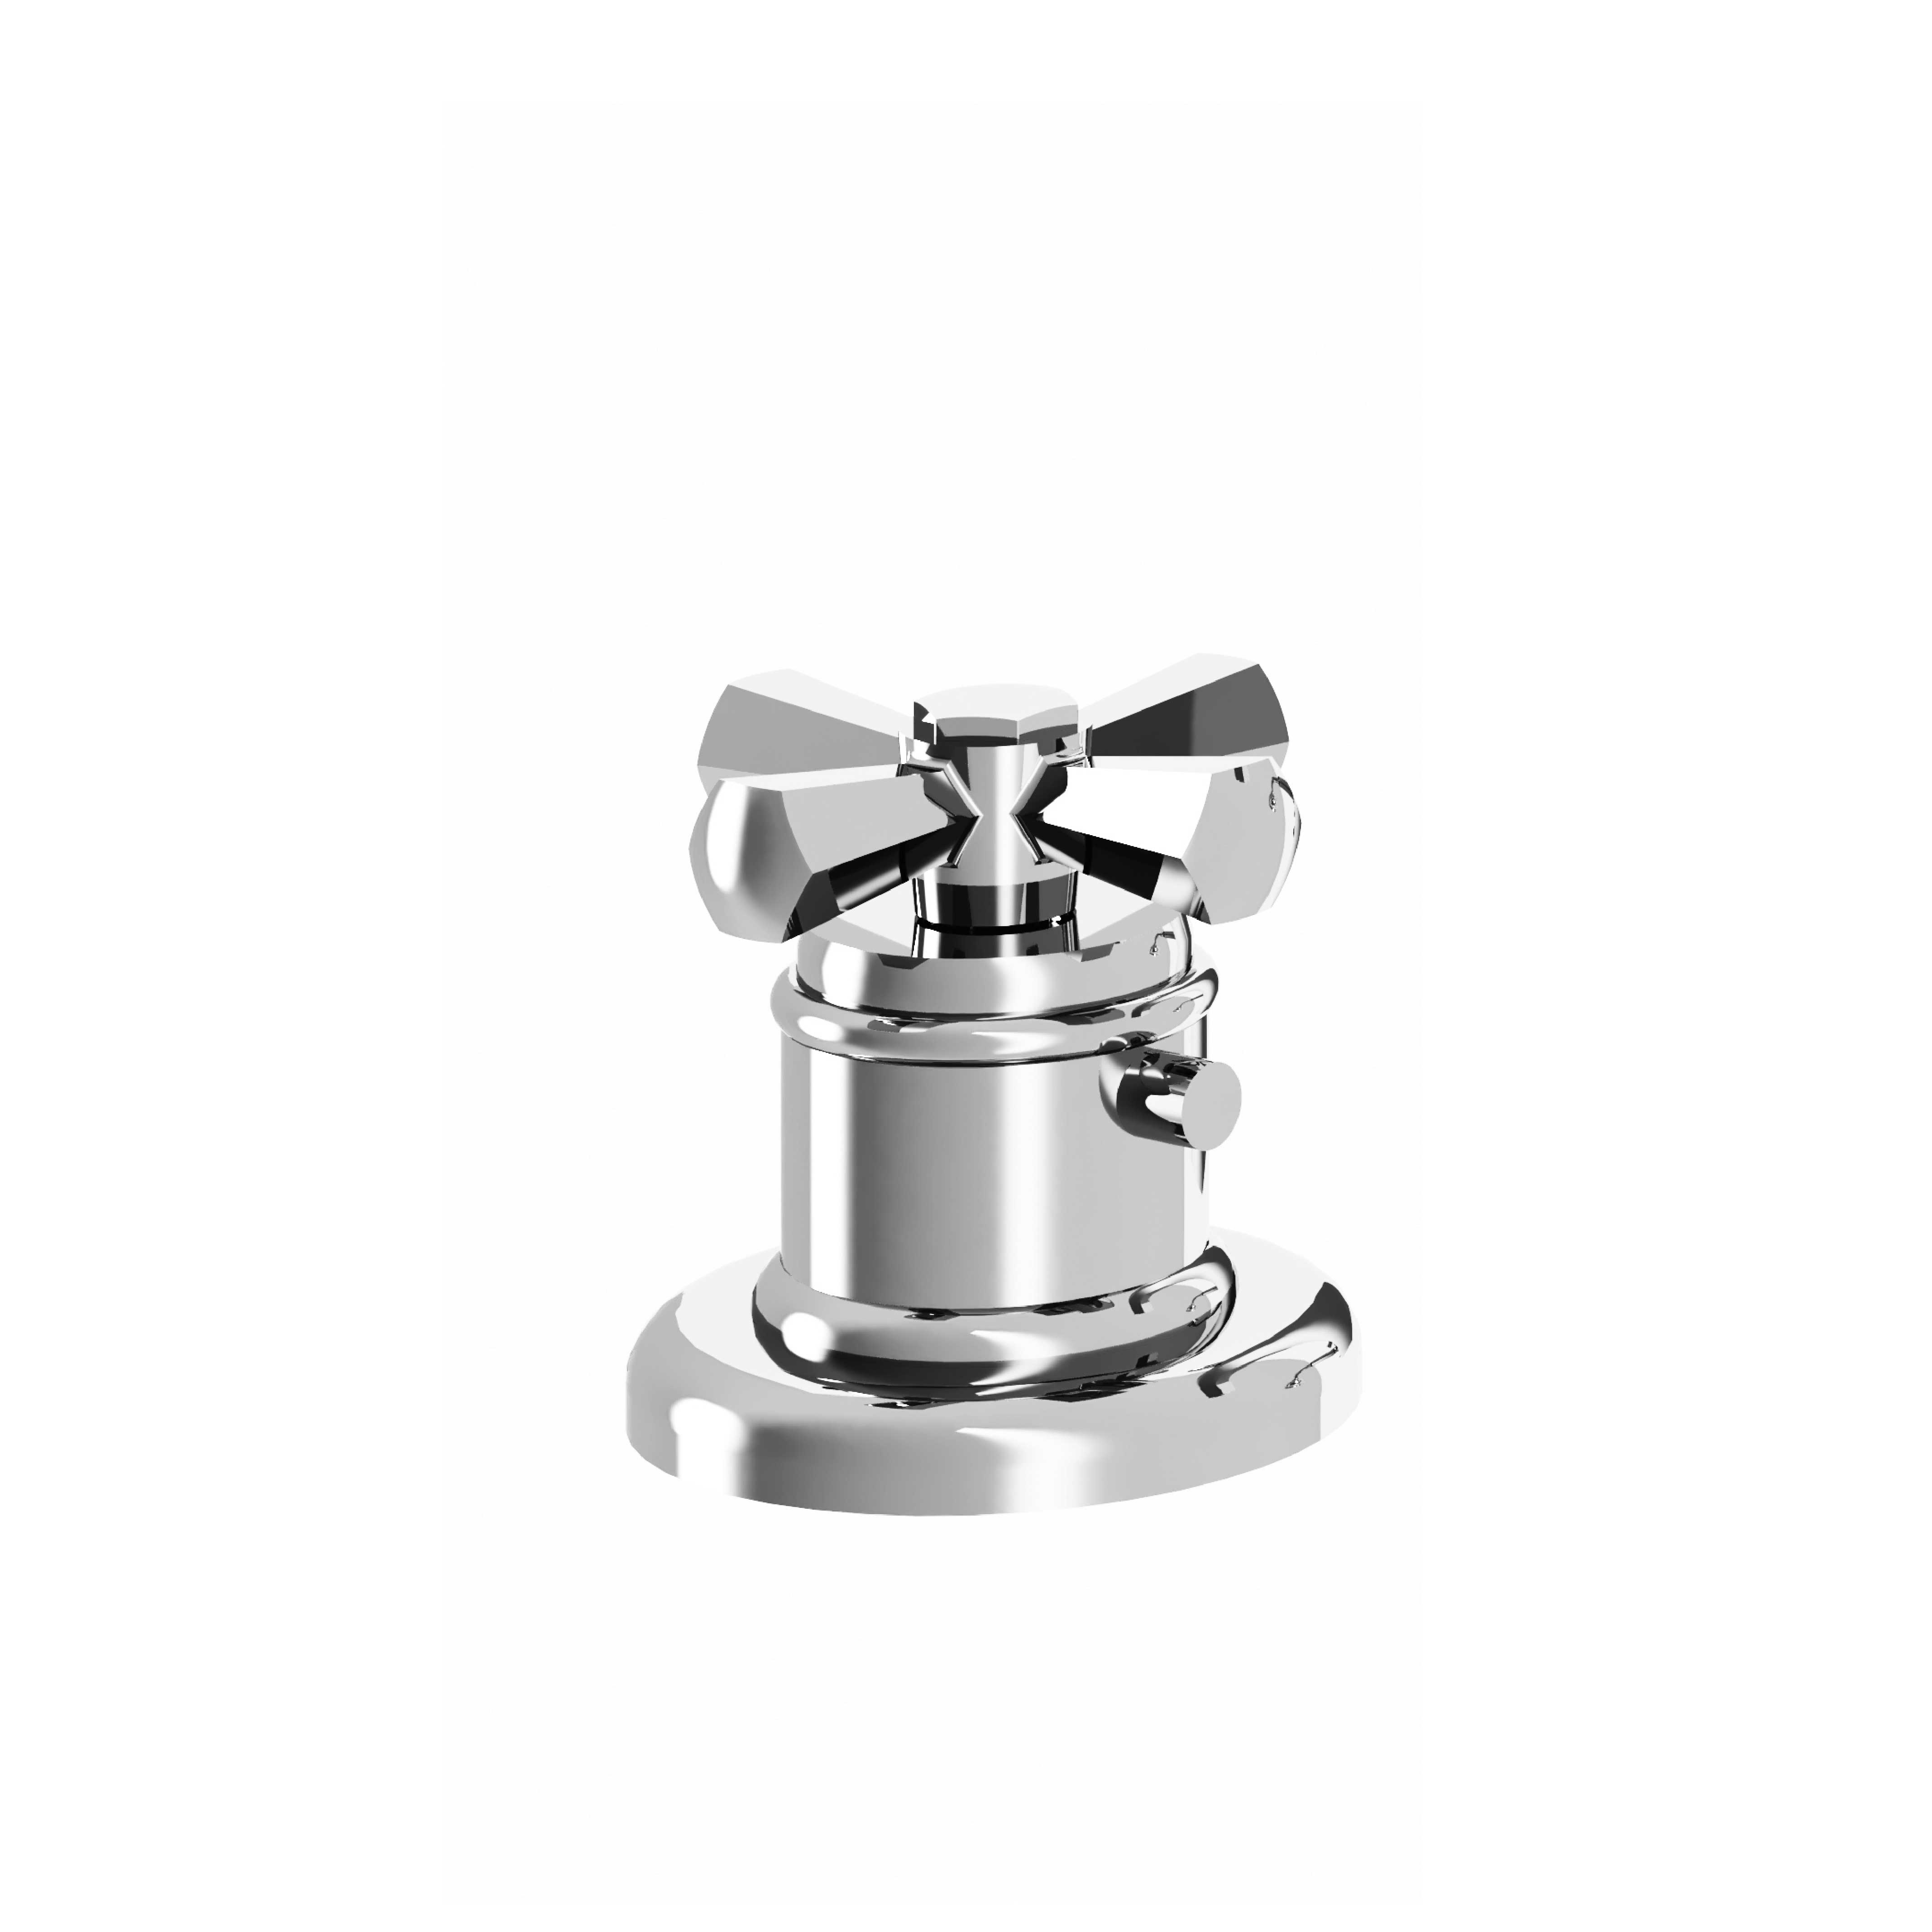 M38-330T Rim mounted thermo mixer